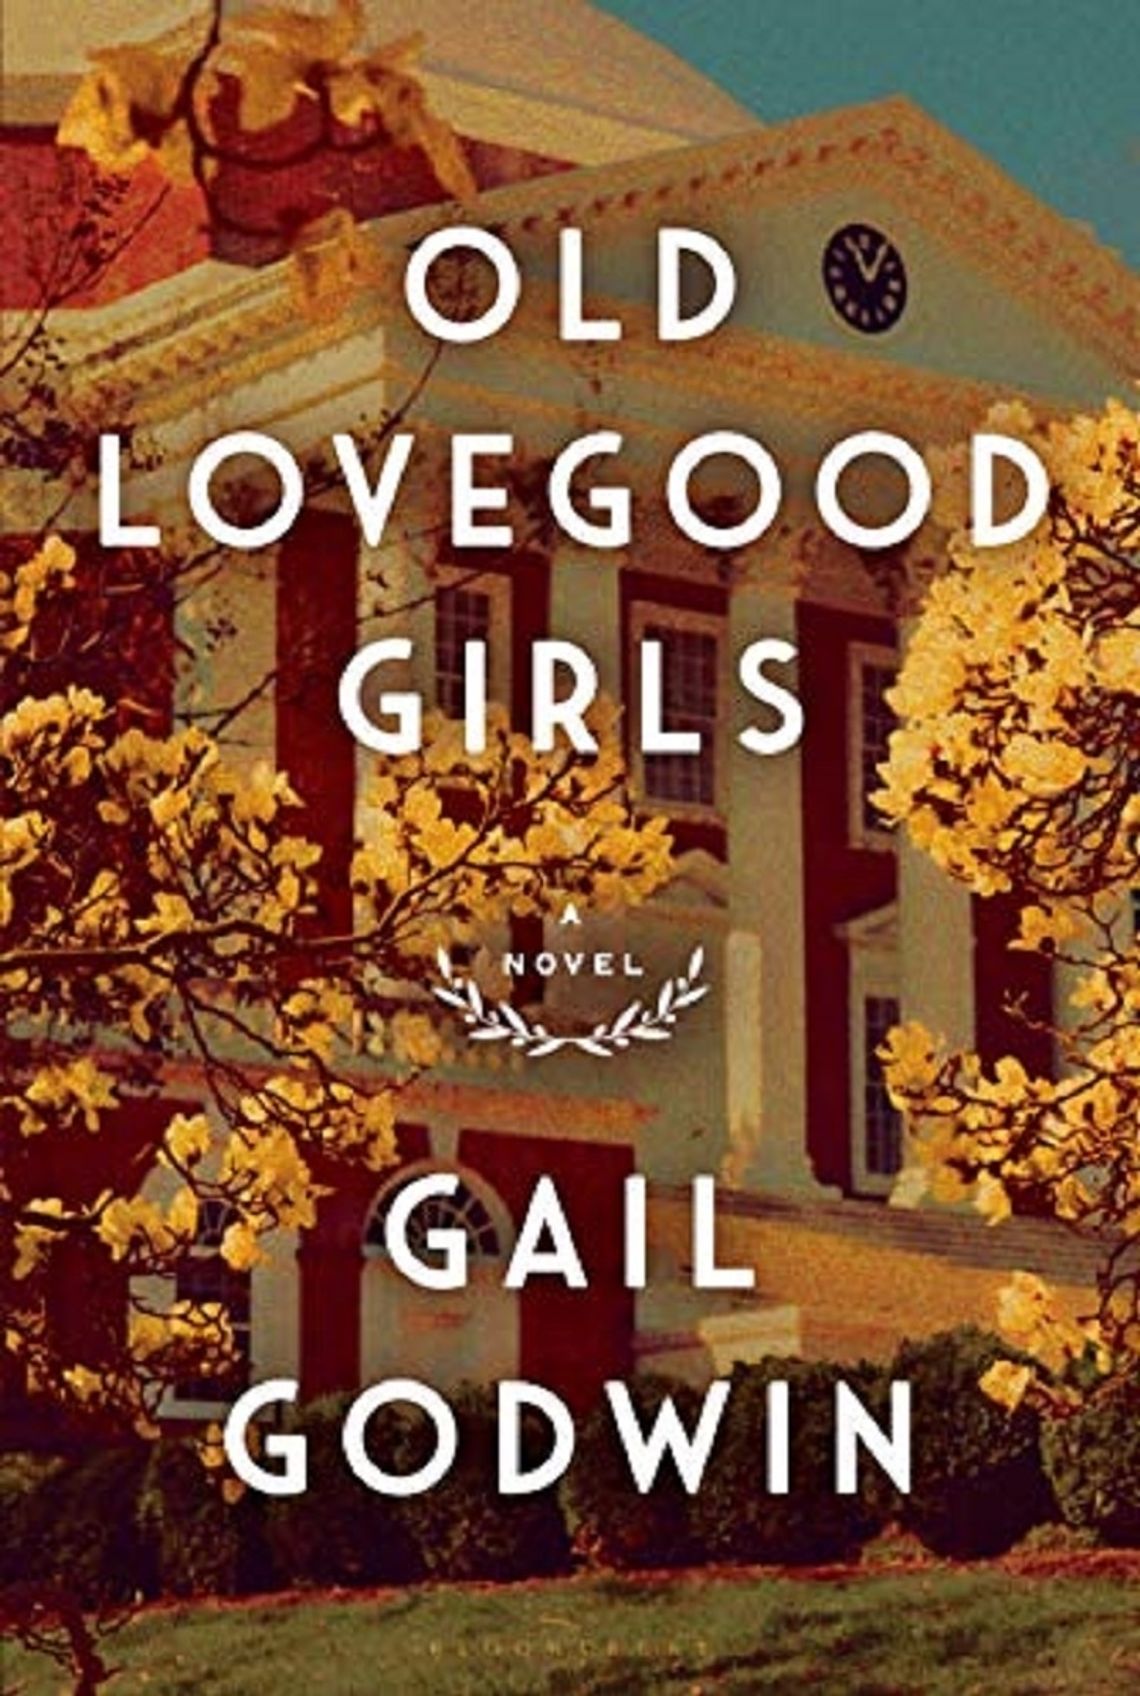 Book Review -- "Old Lovegood Girls"